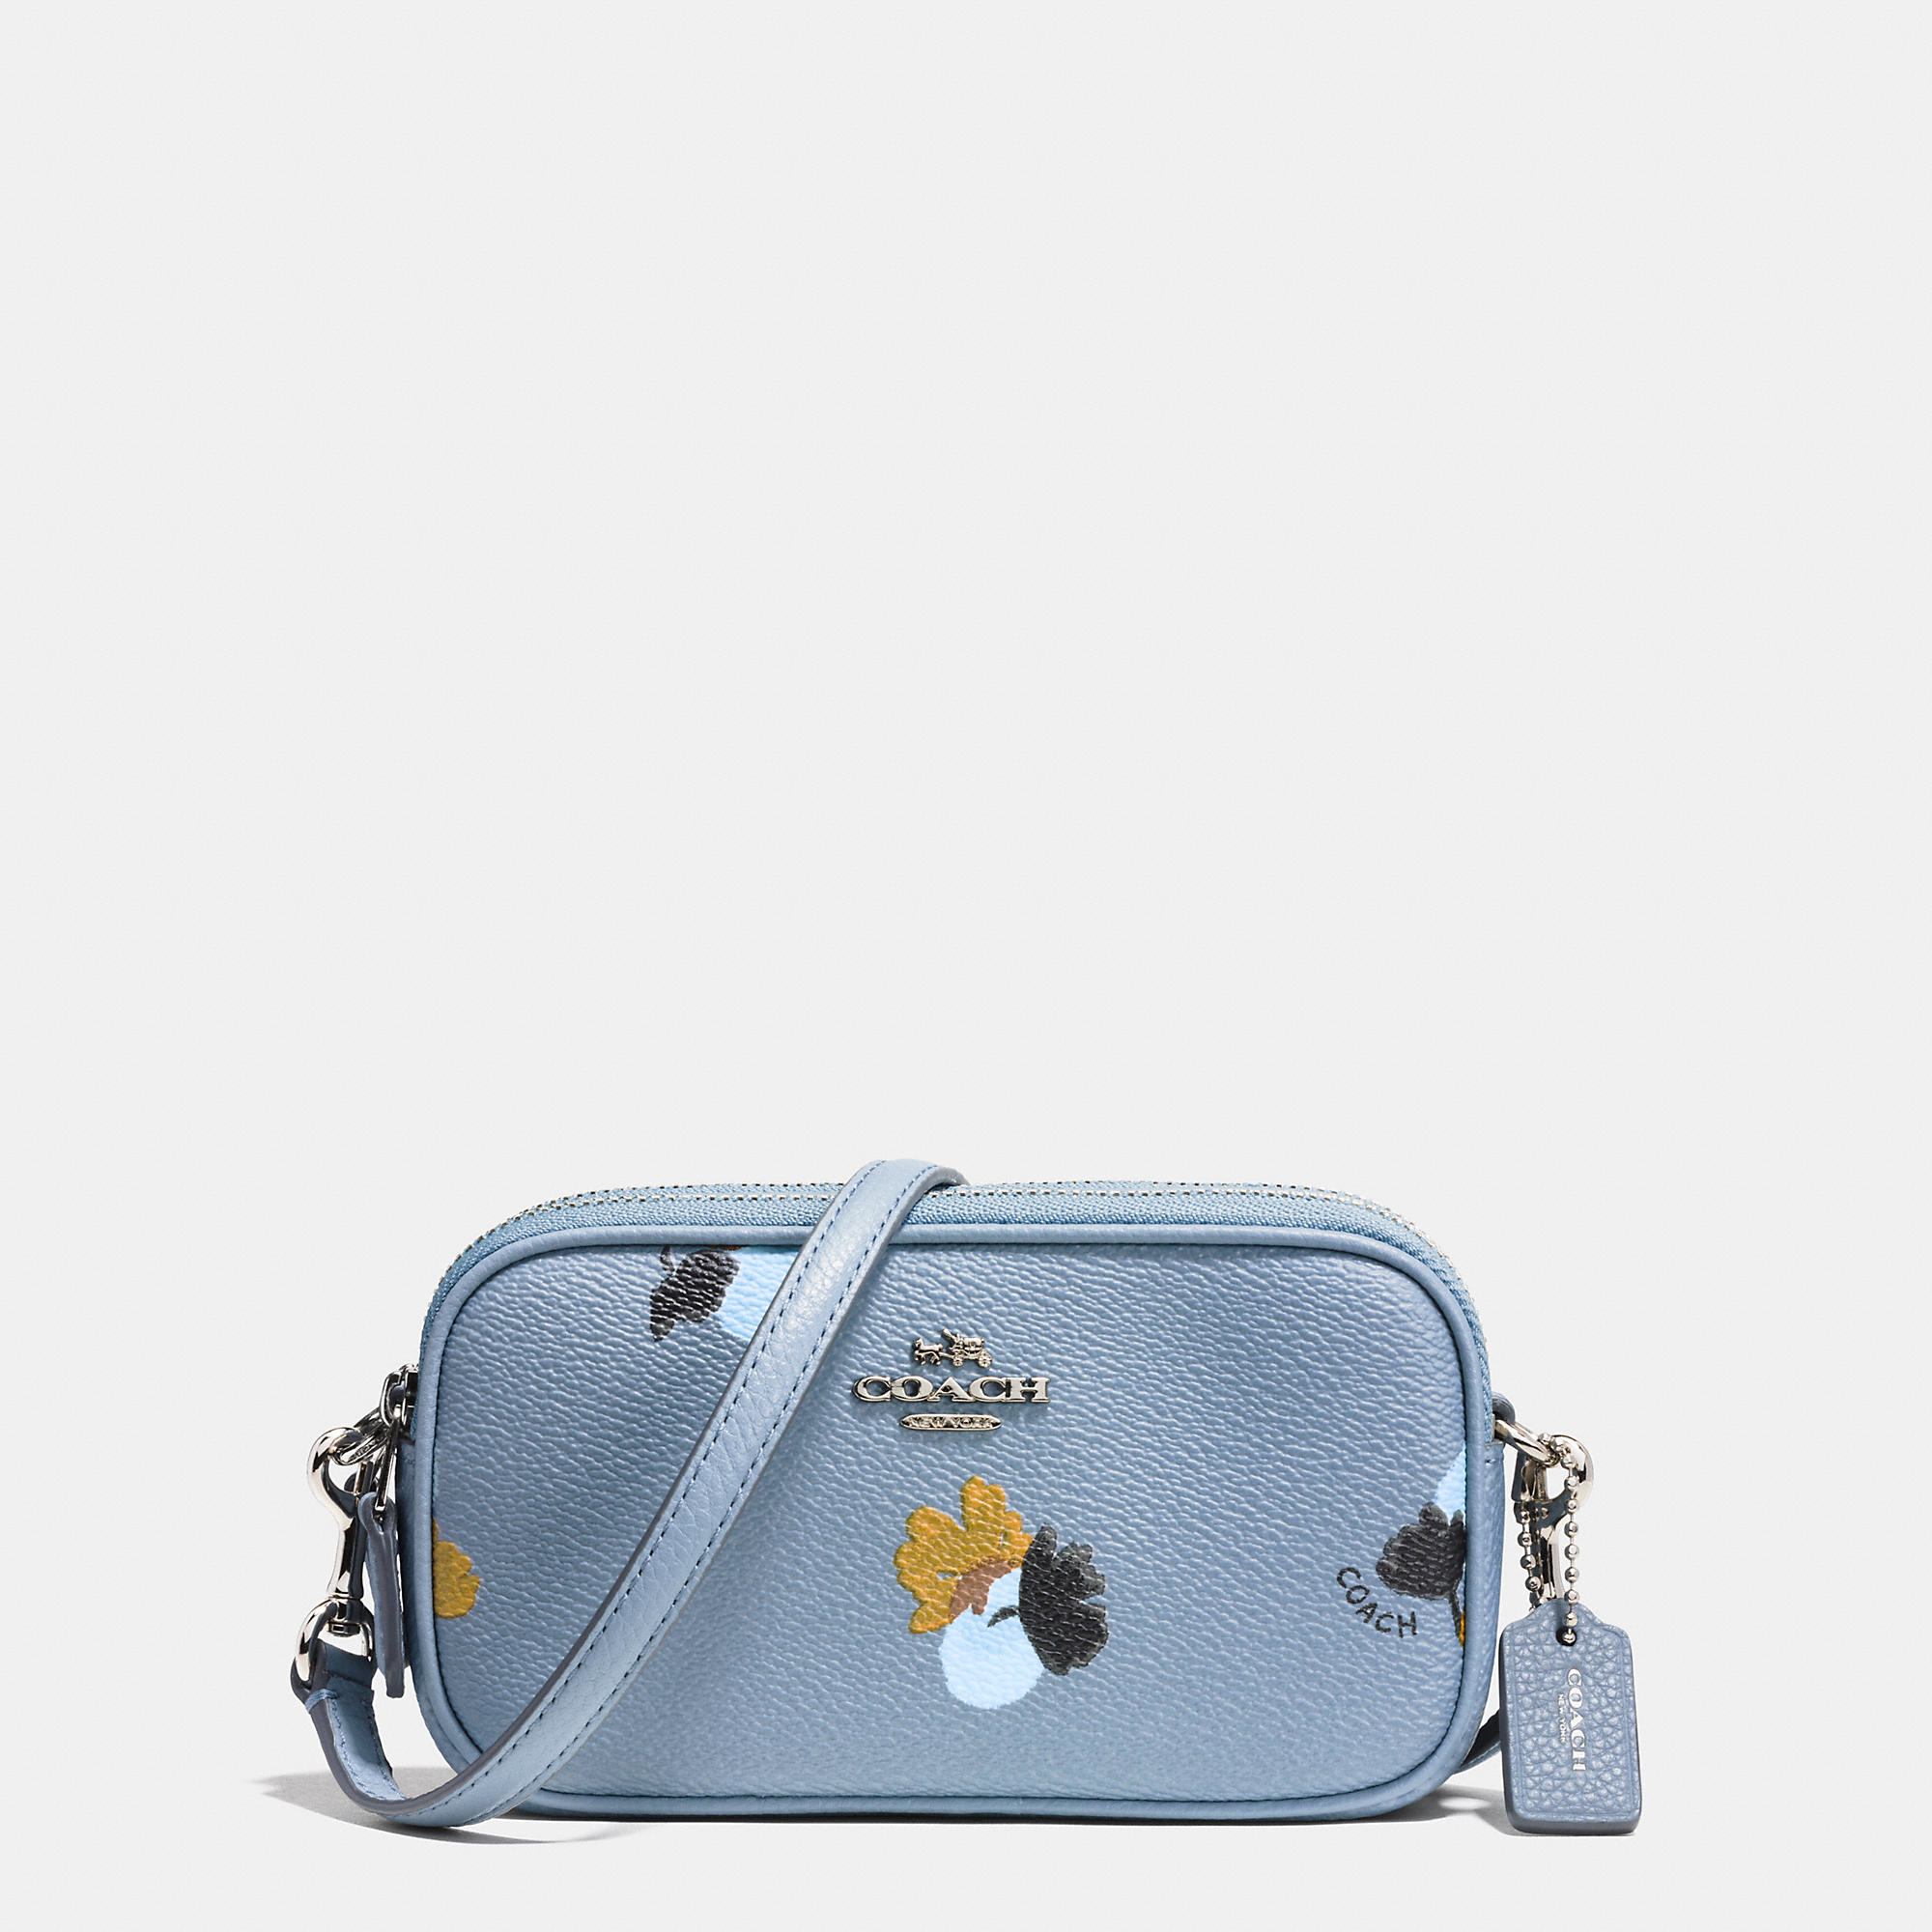 COACH Crossbody Pouch In Floral Print Coated Canvas in Metallic - Lyst